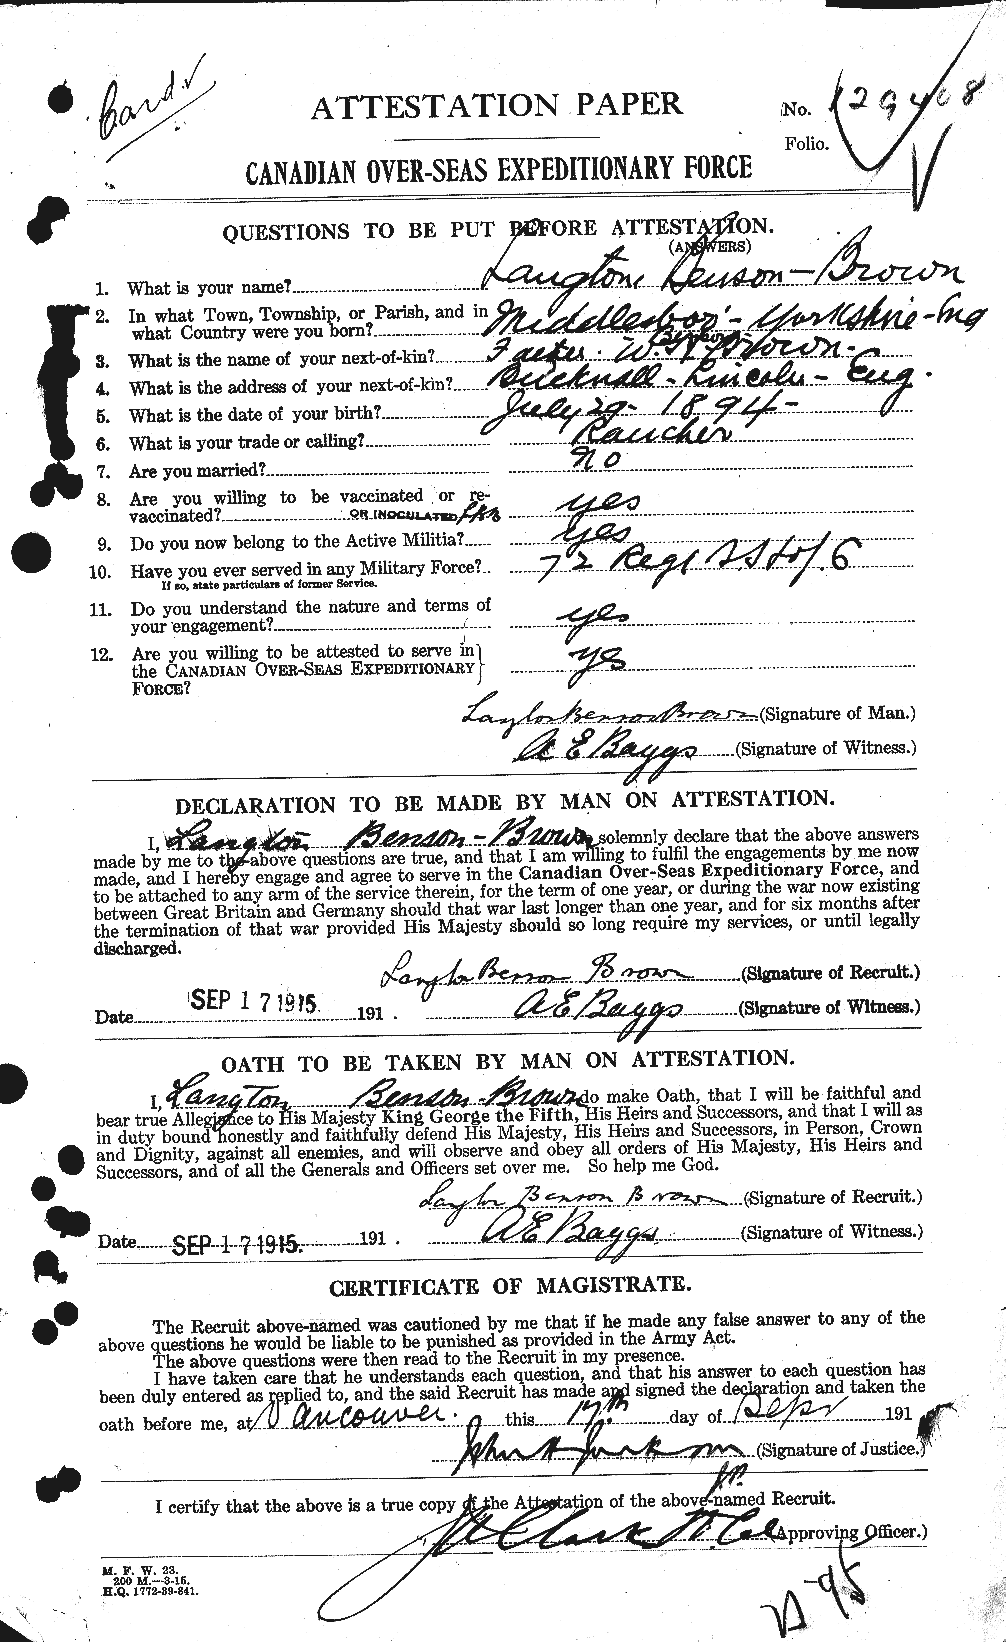 Personnel Records of the First World War - CEF 266253a